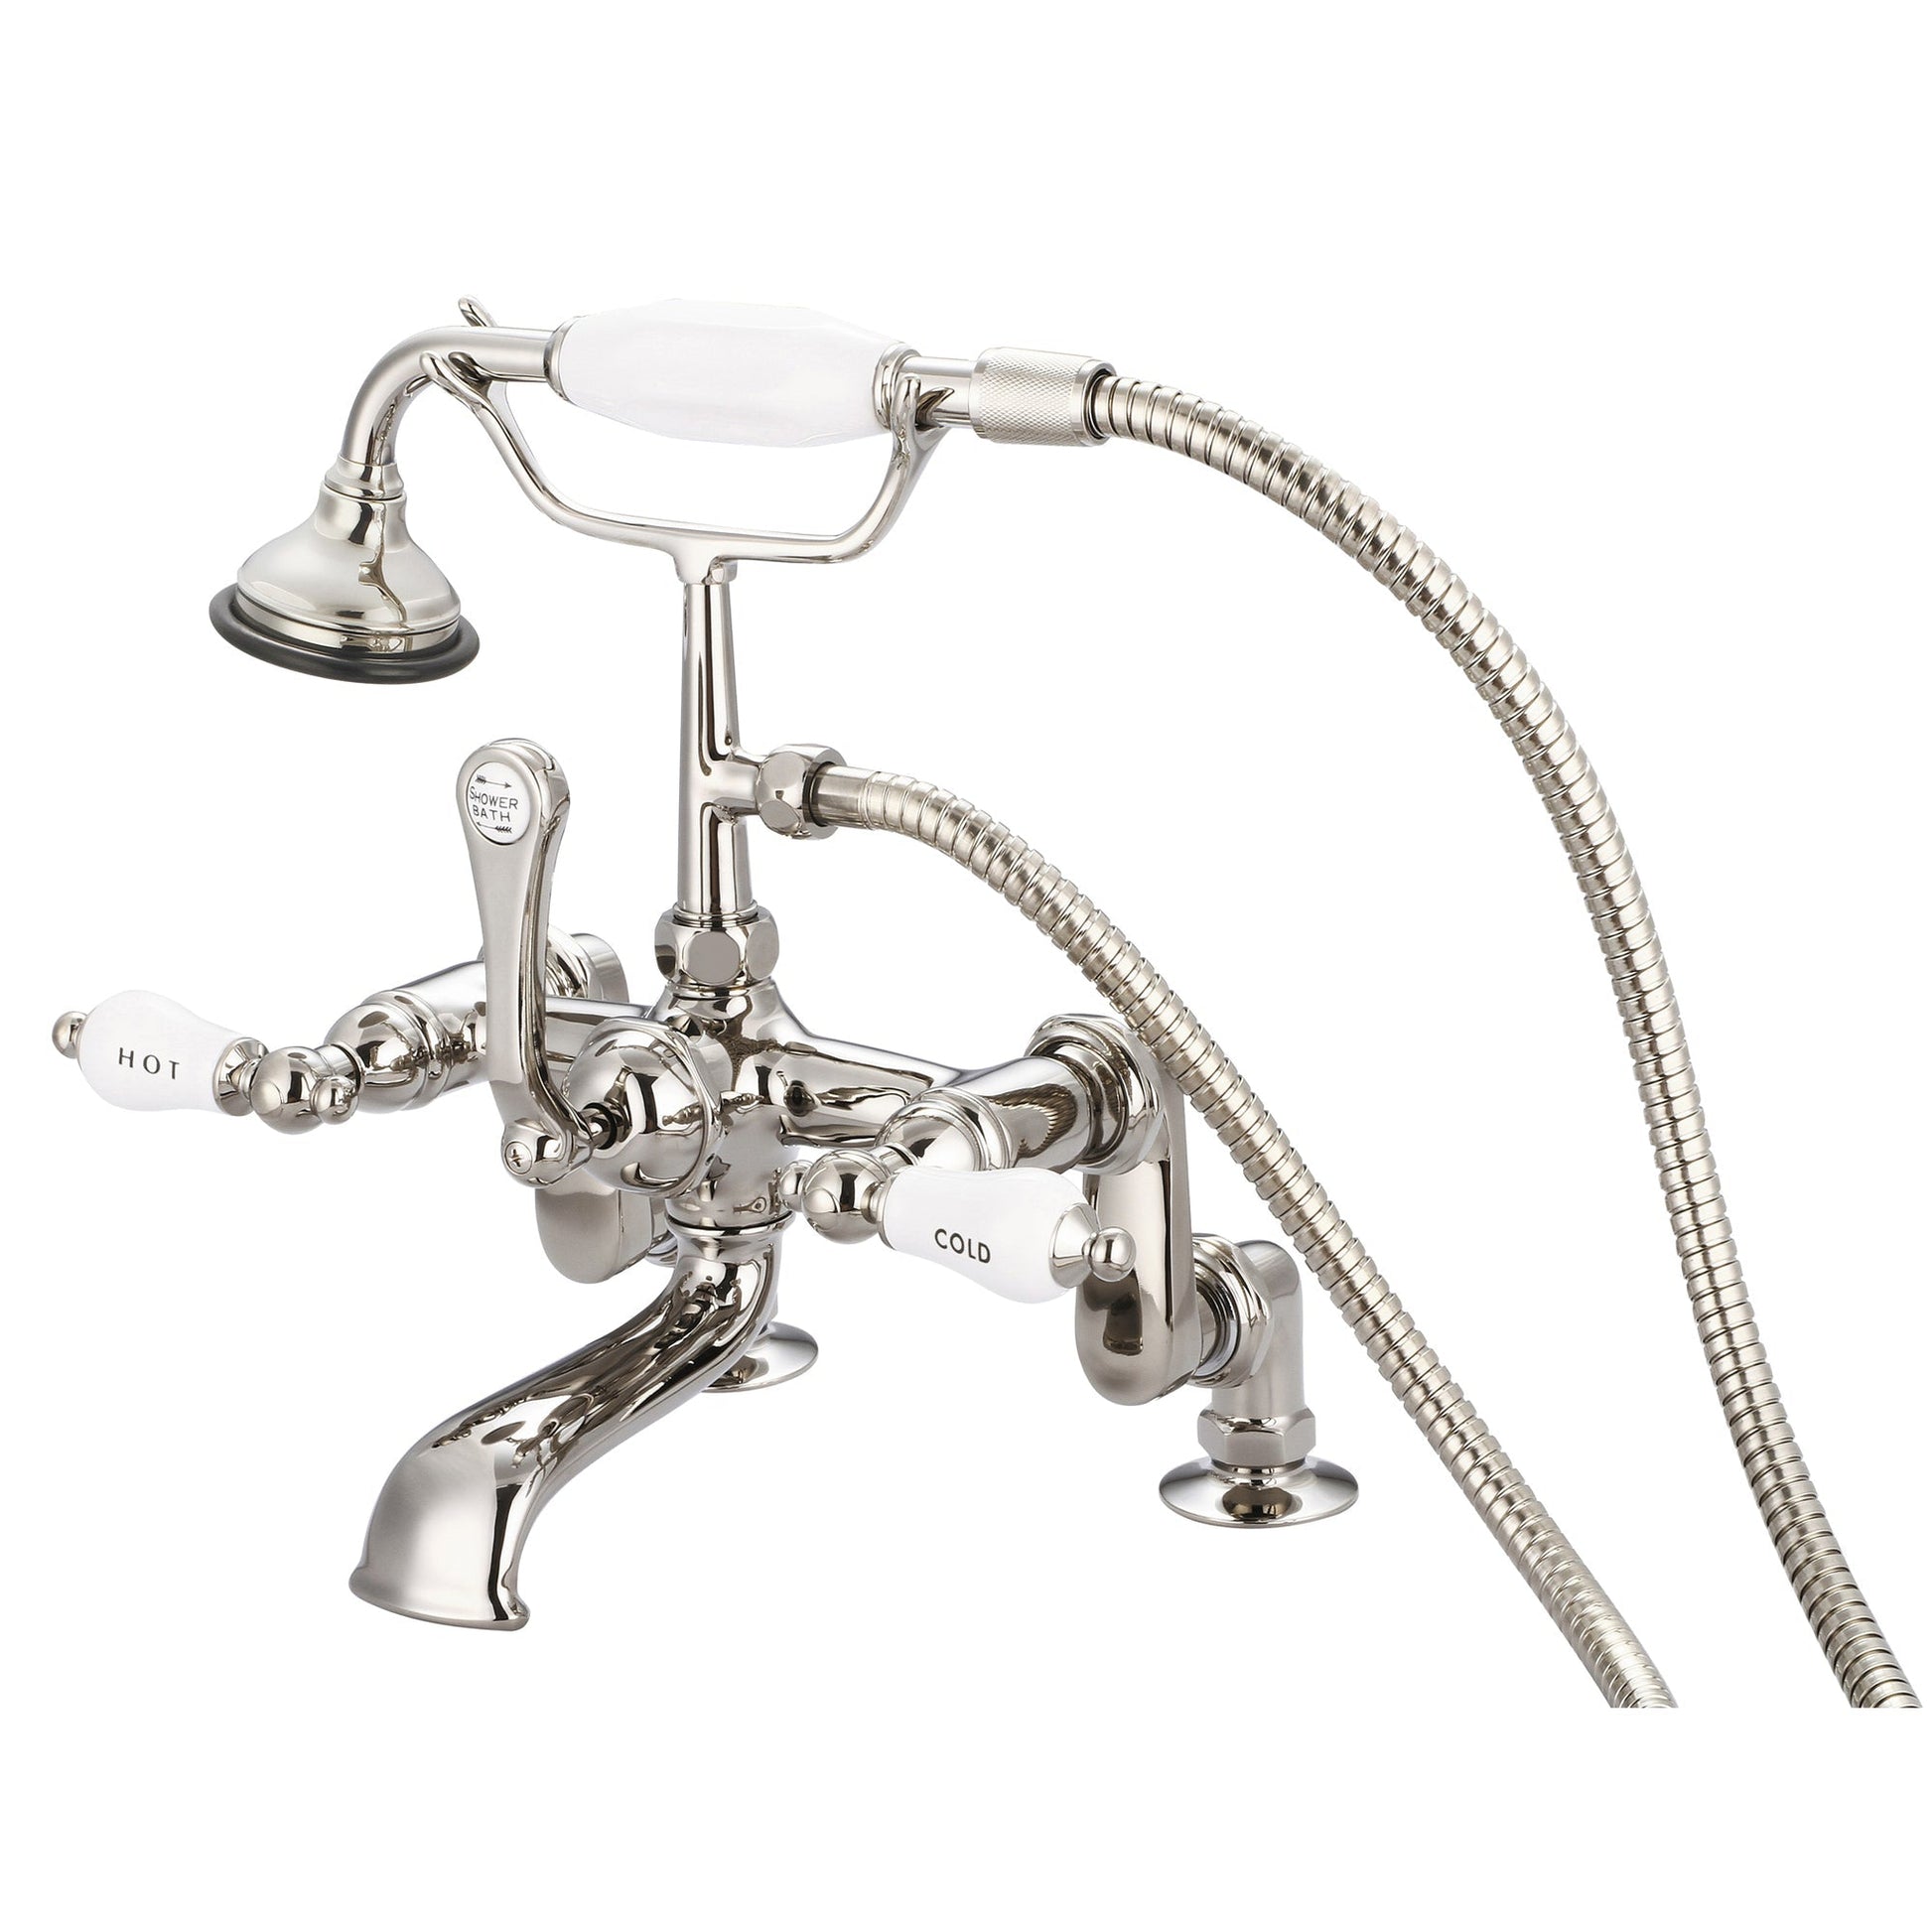 Water Creation Vintage Classic Adjustable Center Deck Mount Tub F6-0008 7" Ivory Solid Brass Faucet With Handheld Shower And Porcelain Lever Handles, Hot And Cold Labels Included